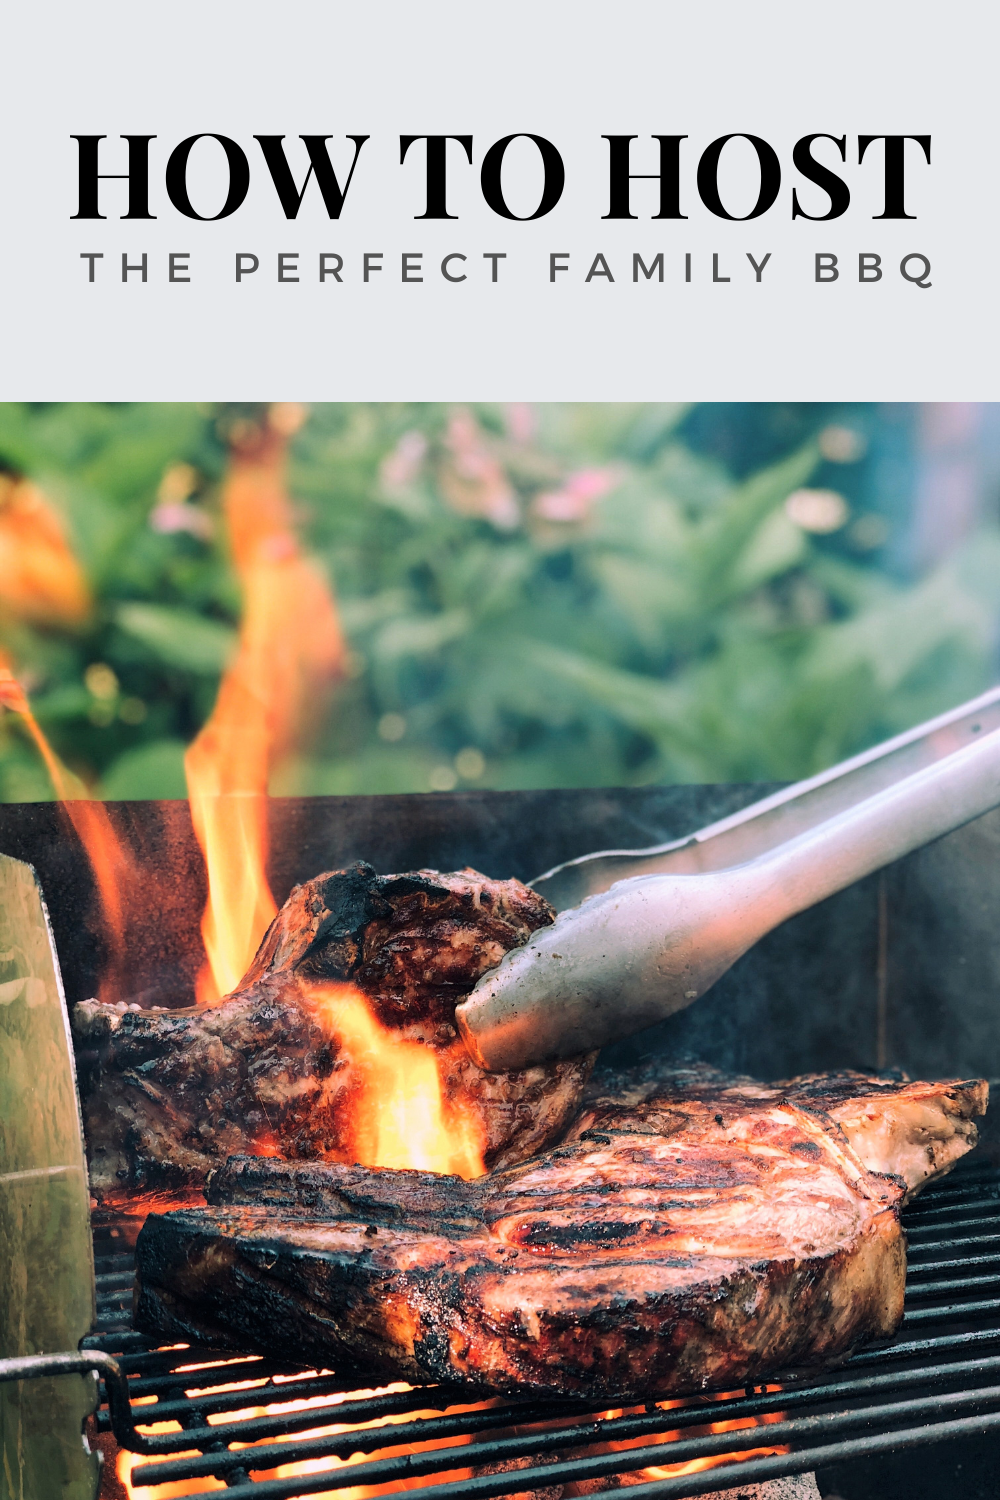 Steak being BBQ'd on a charcoal BBQ. The fire is rising high and a pair of tongs are being used to flip the meat. This article covers how to host the perfect family BBQ.